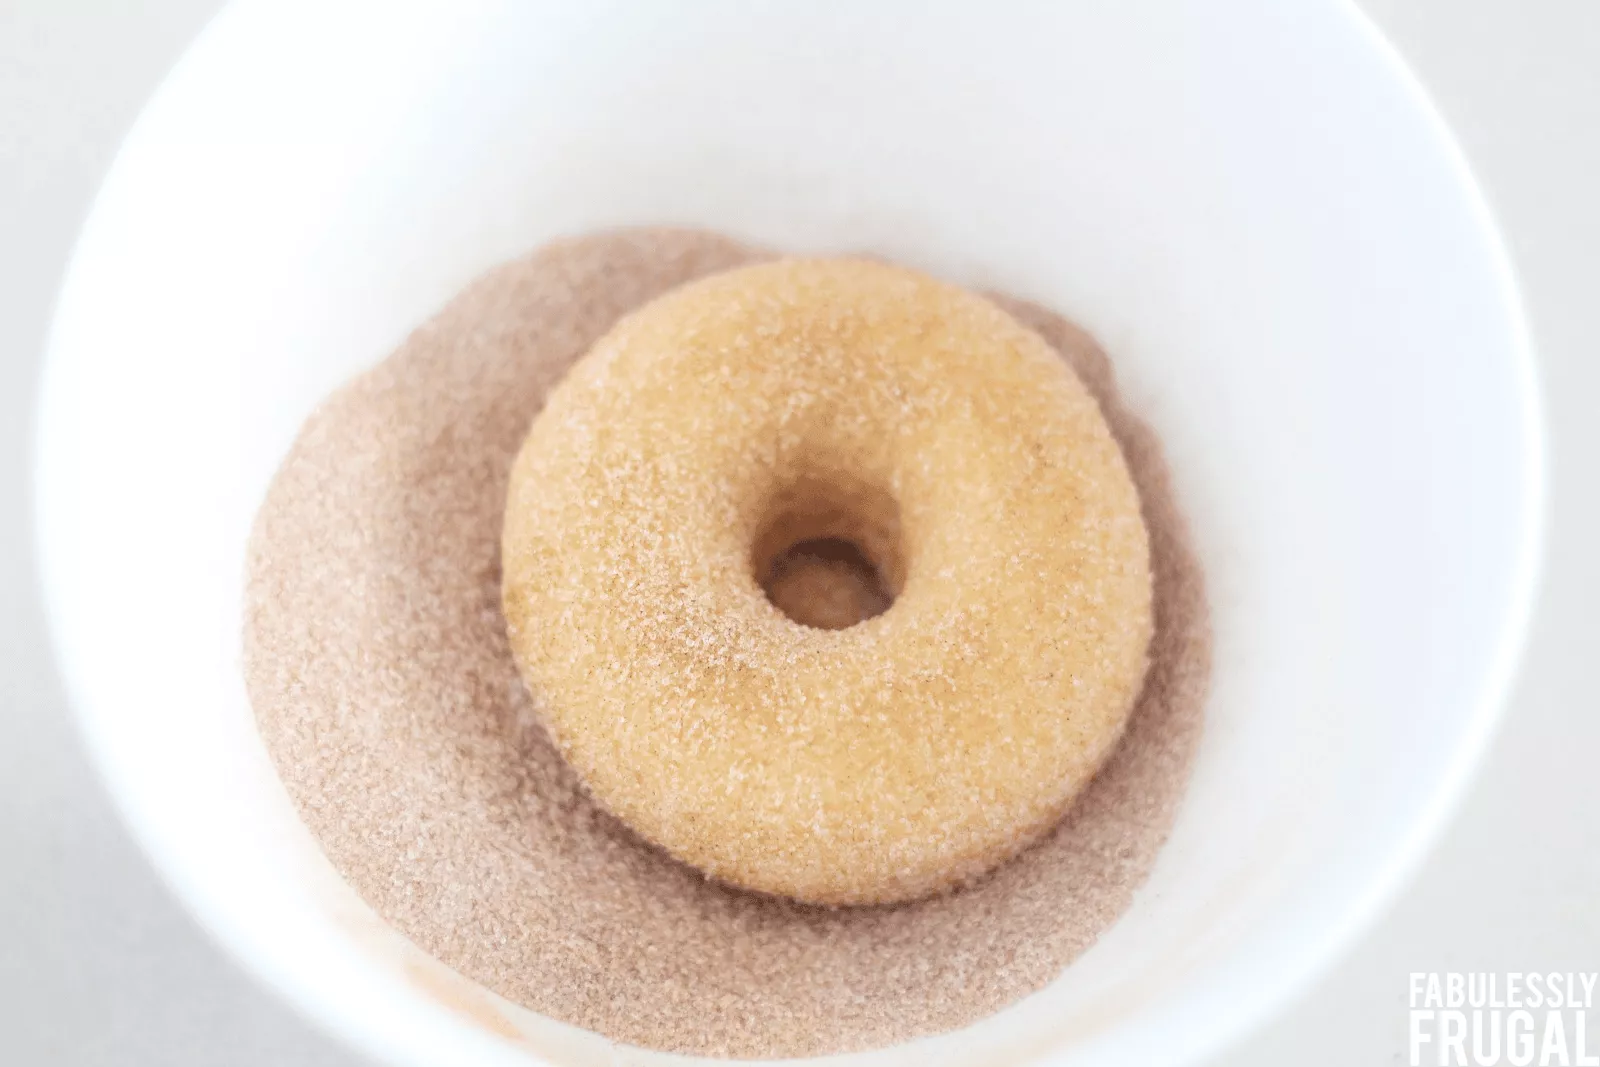 coat keto donuts in cinnamon and erythritol.png